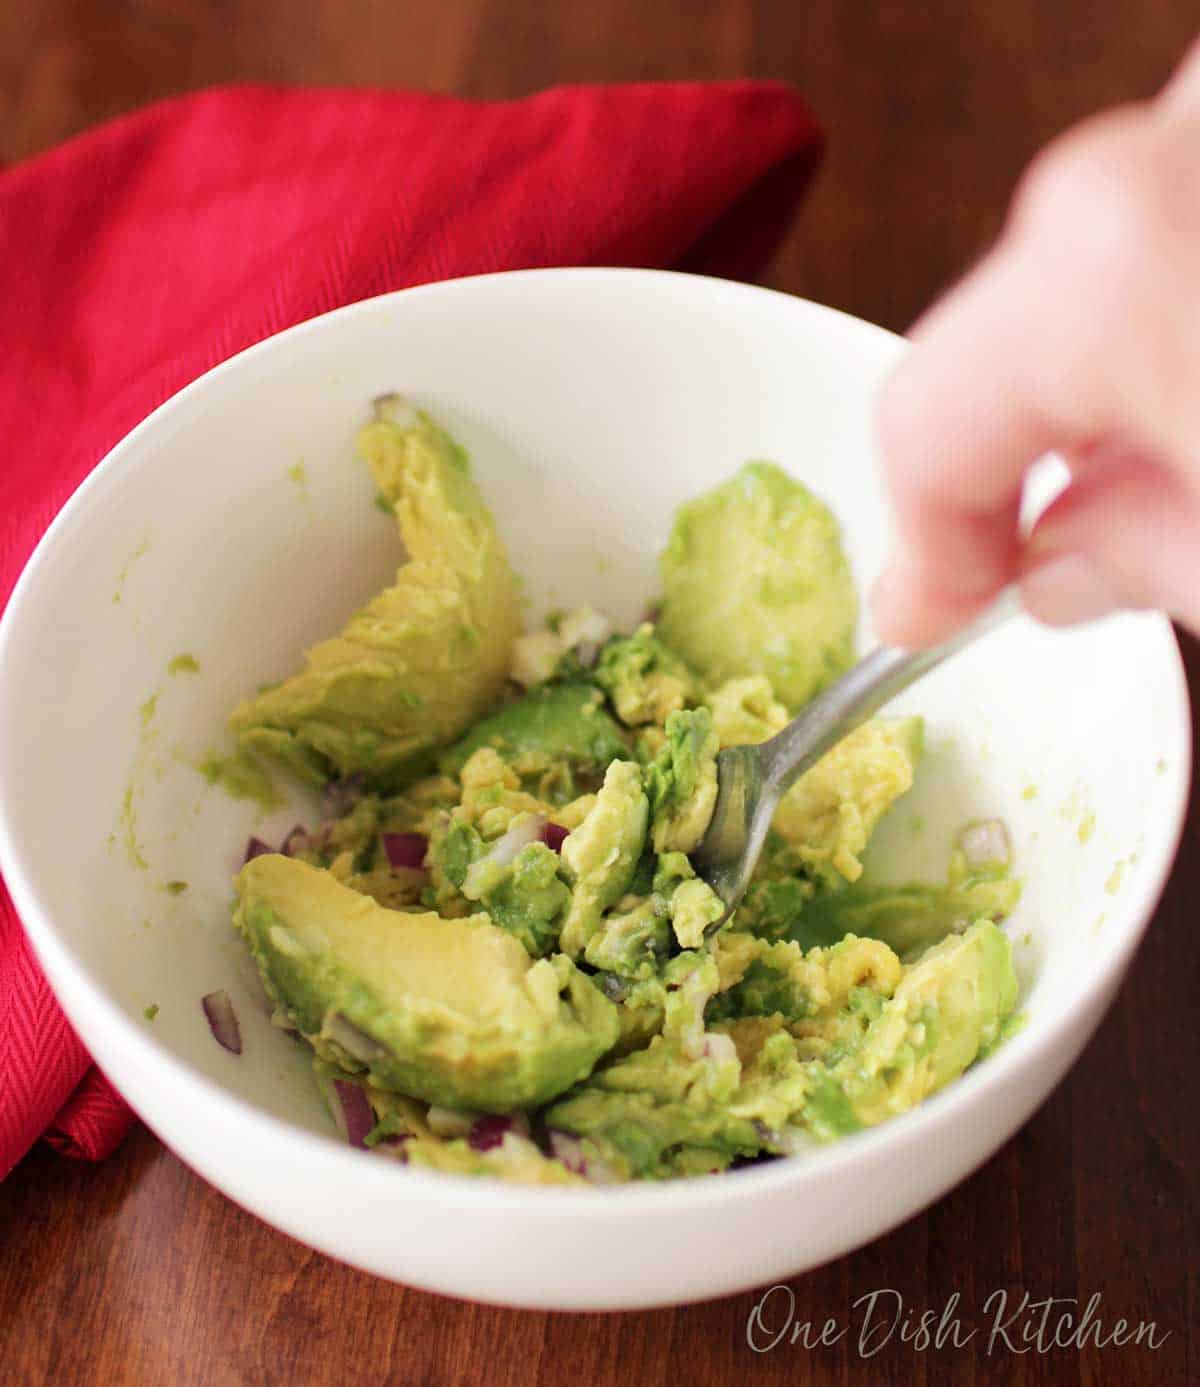 Mashing avocado, chopped red onions, garlic, and salt in a small bowl with a fork.